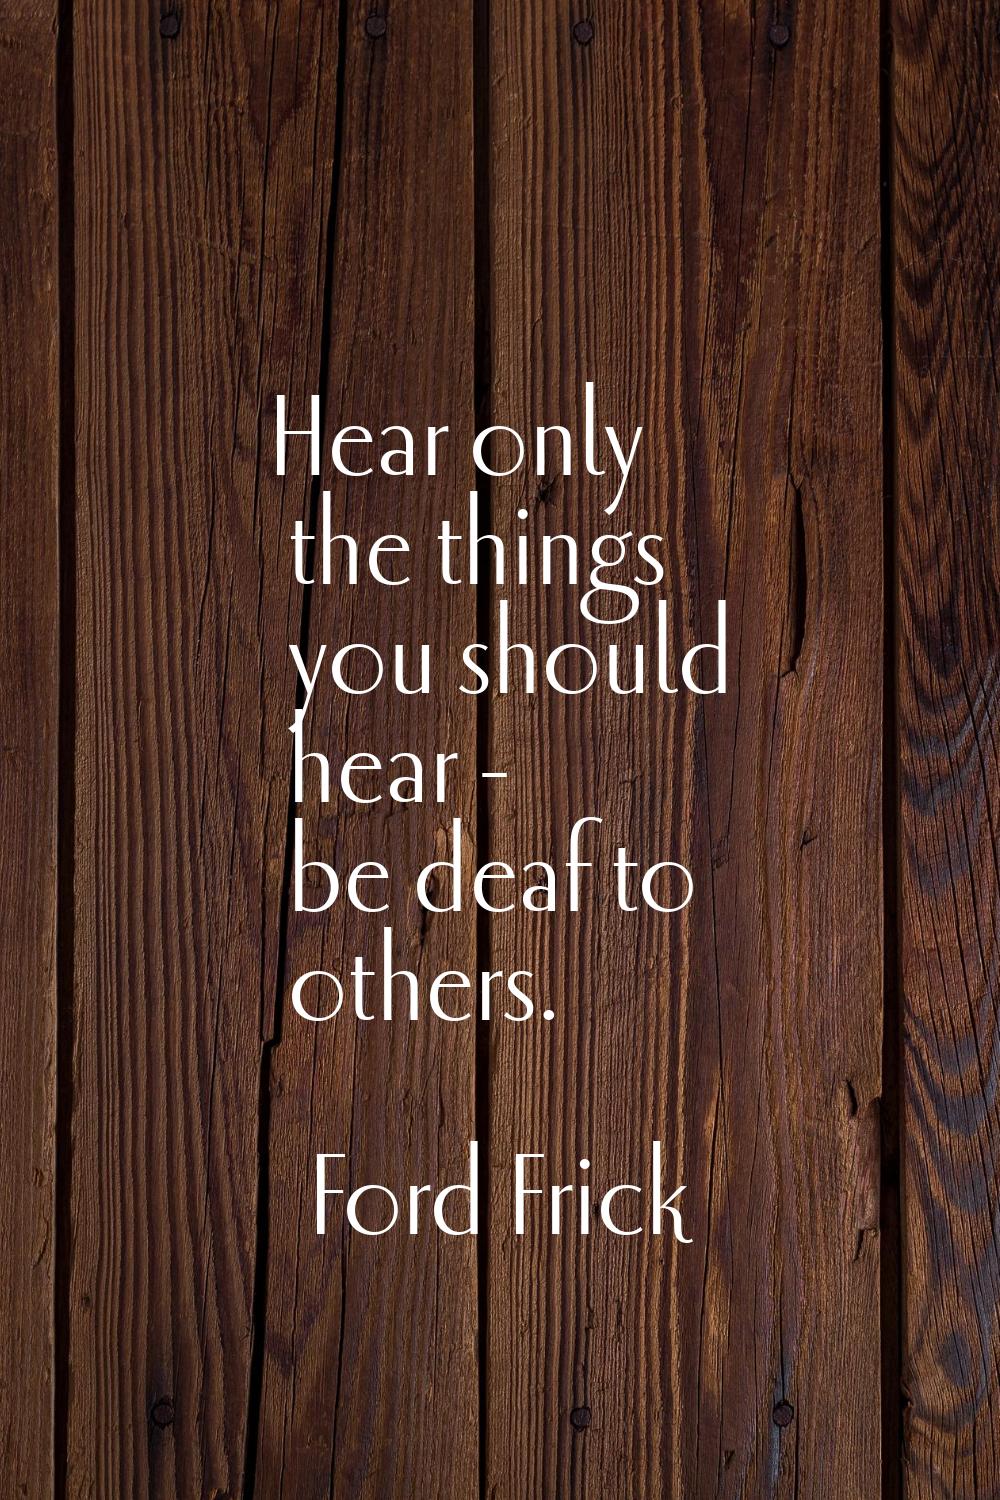 Hear only the things you should hear - be deaf to others.